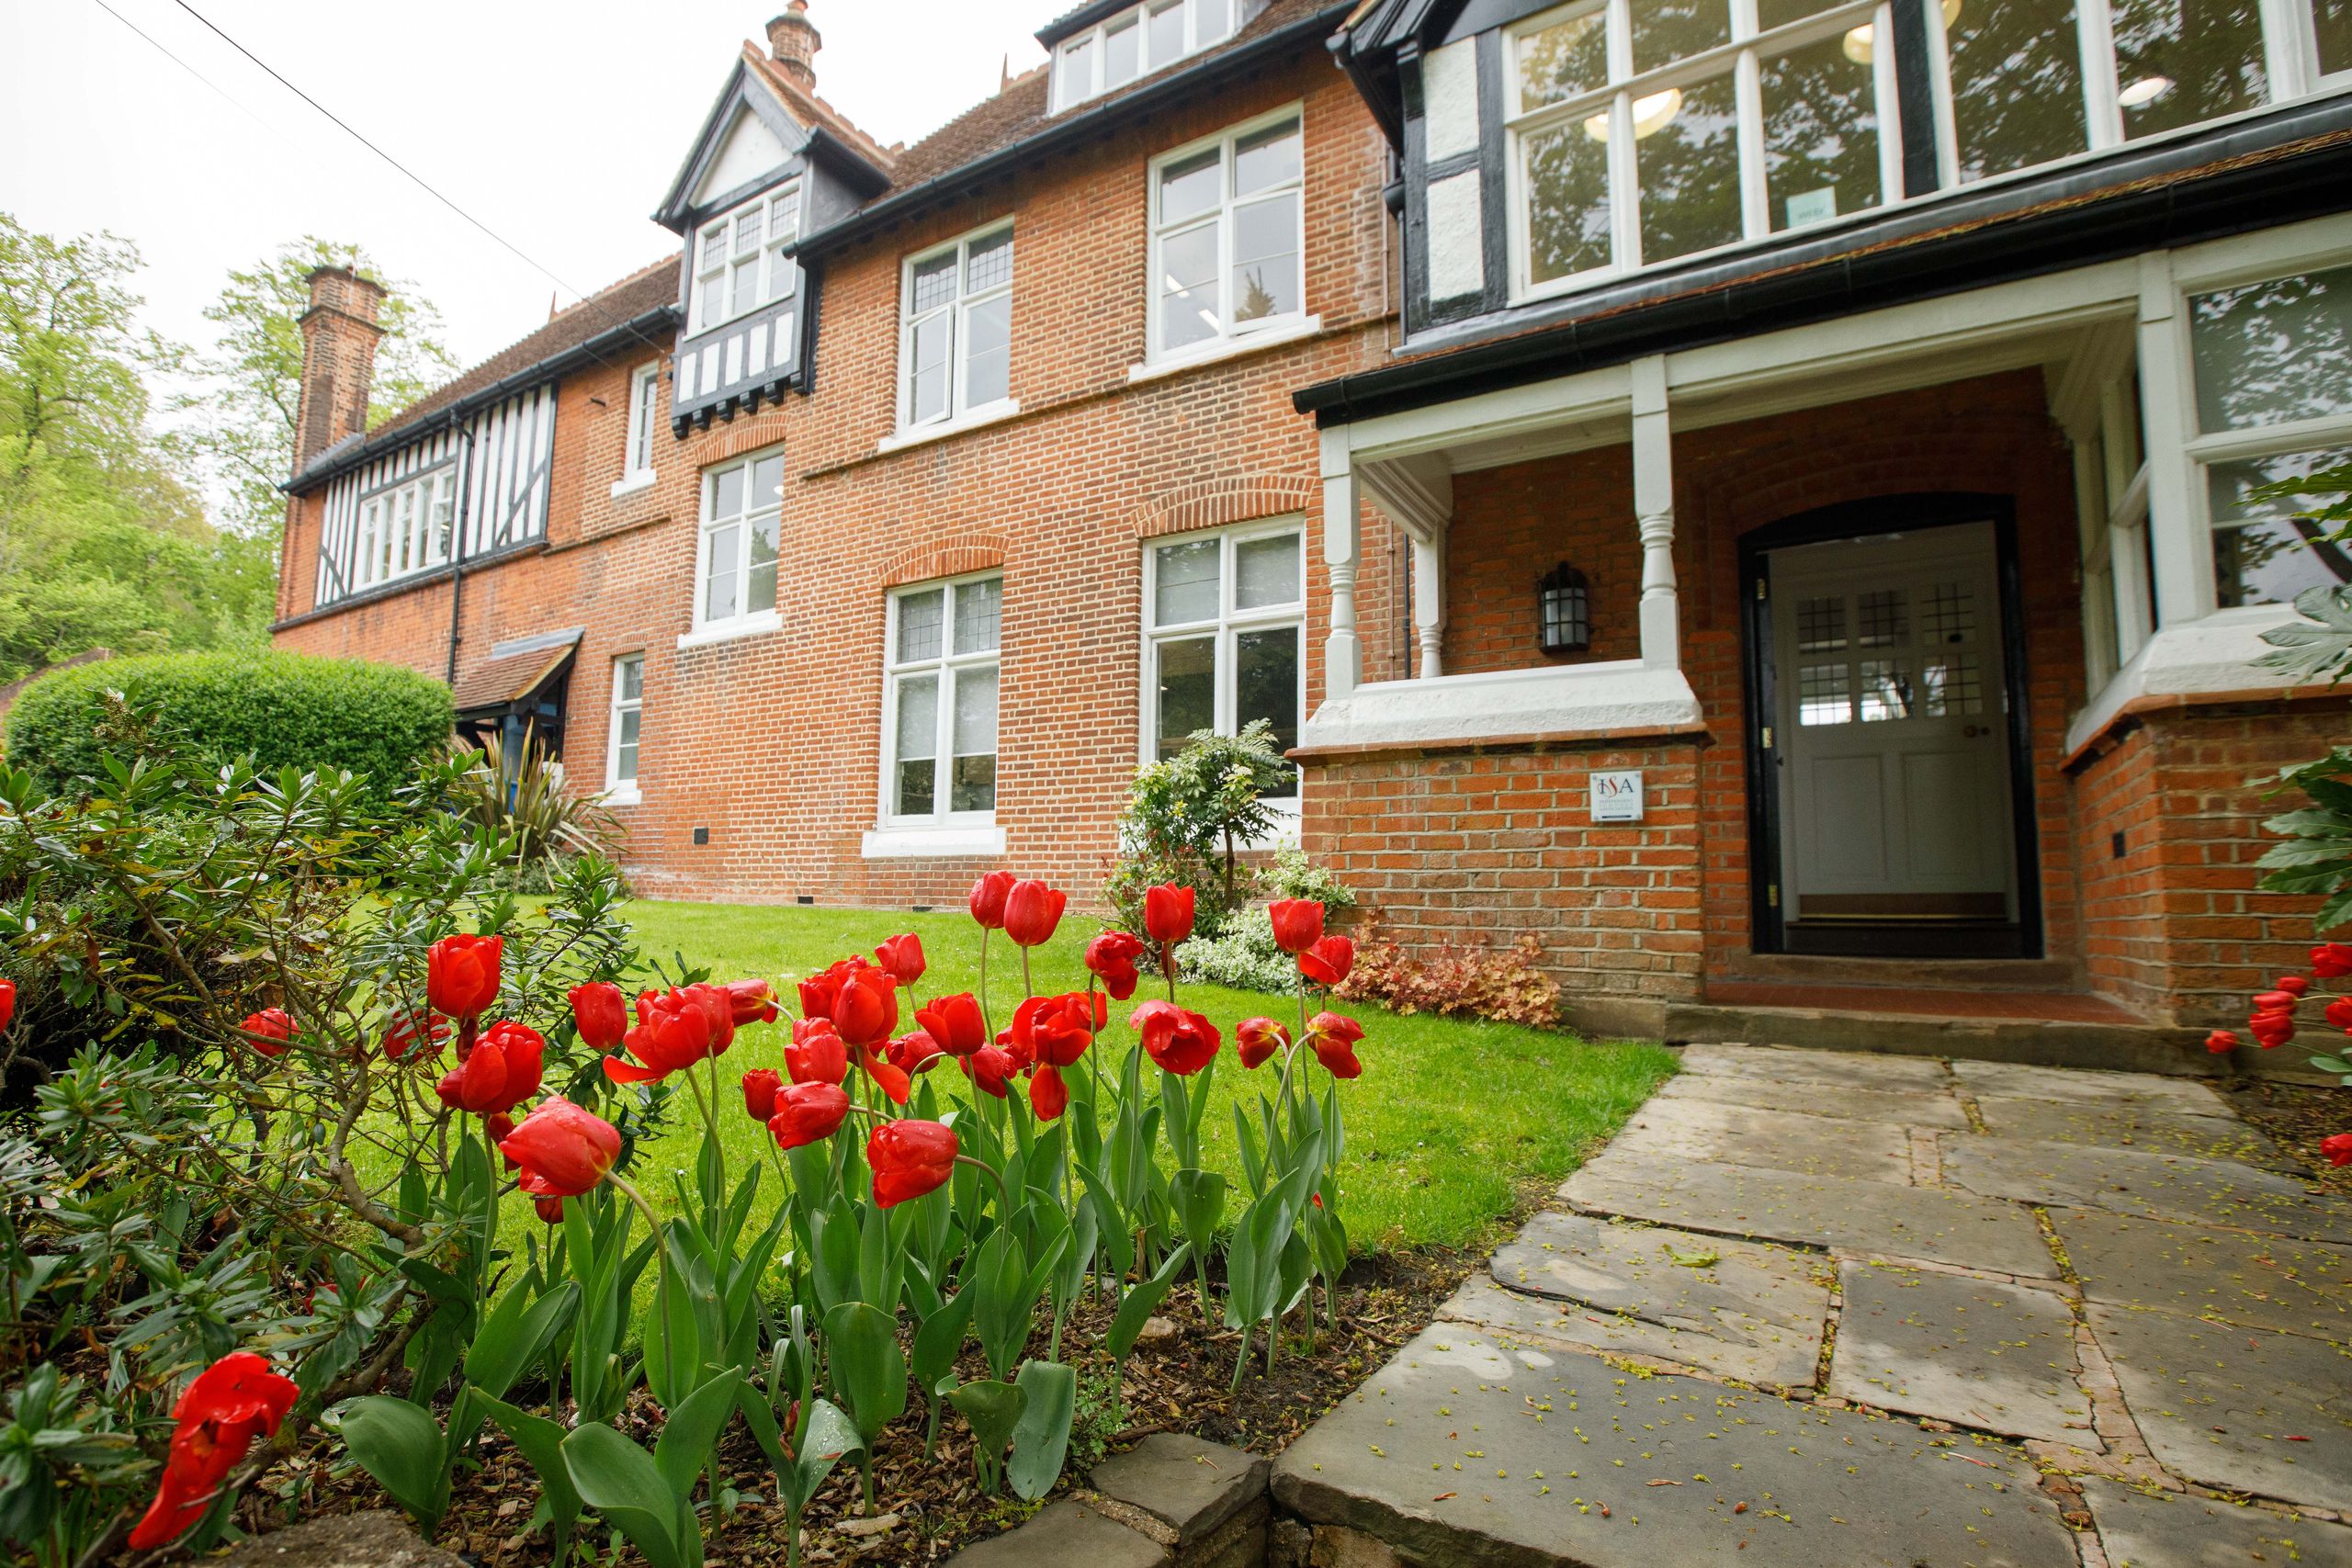 A brick building and red tulips 